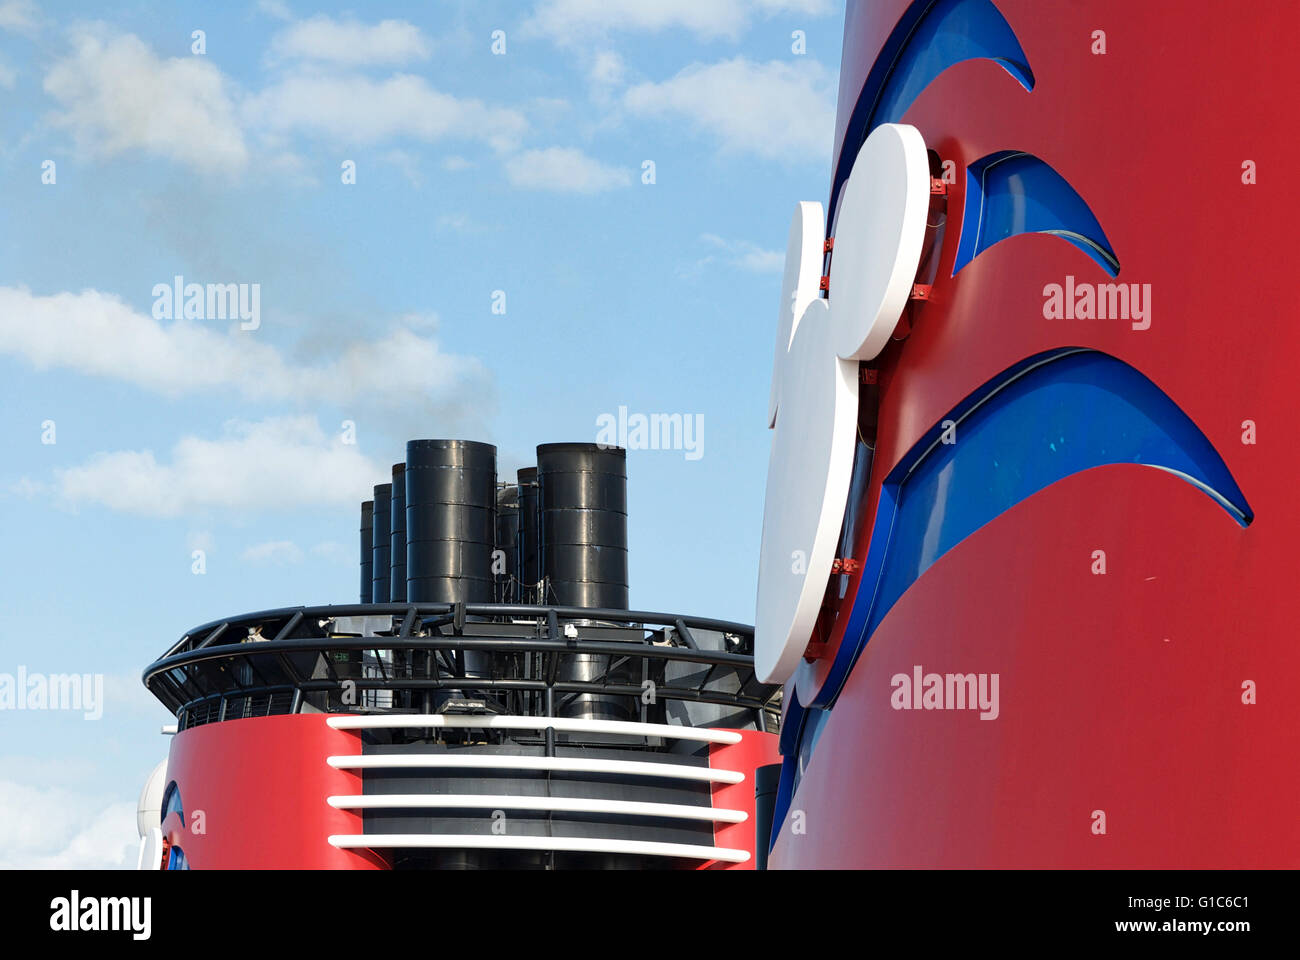 Close-up image of the smokestack of the Disney Dream cruise ship during a cruise between the United States and The Bahamas. Stock Photo